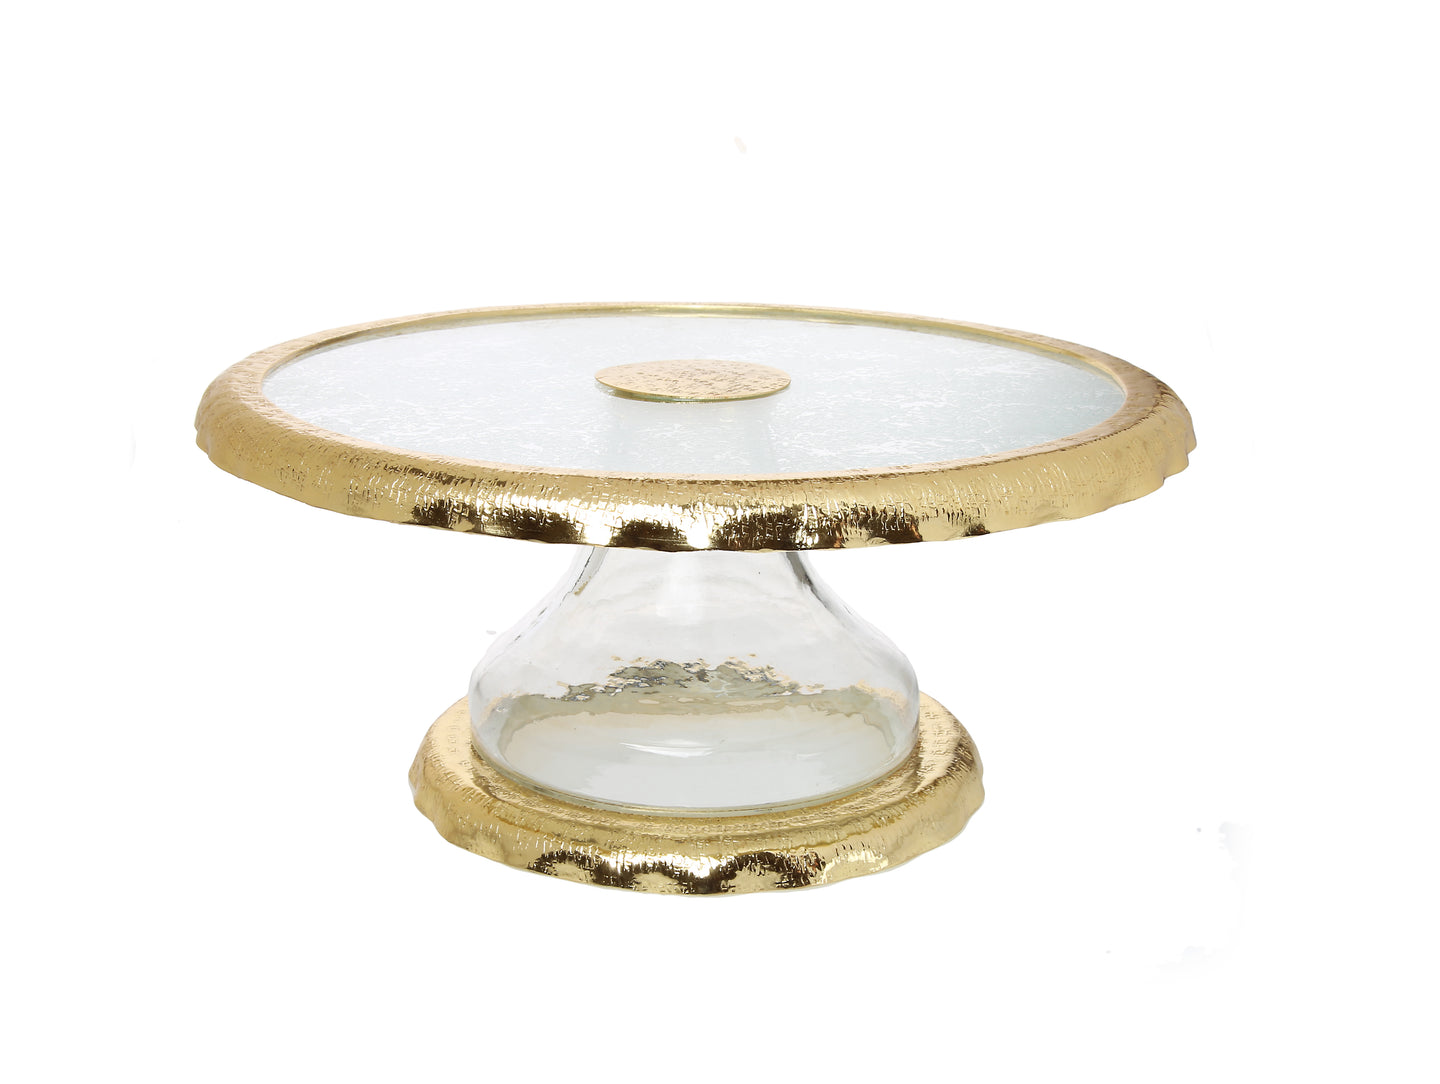 Glass Cake Stand with Gold Border